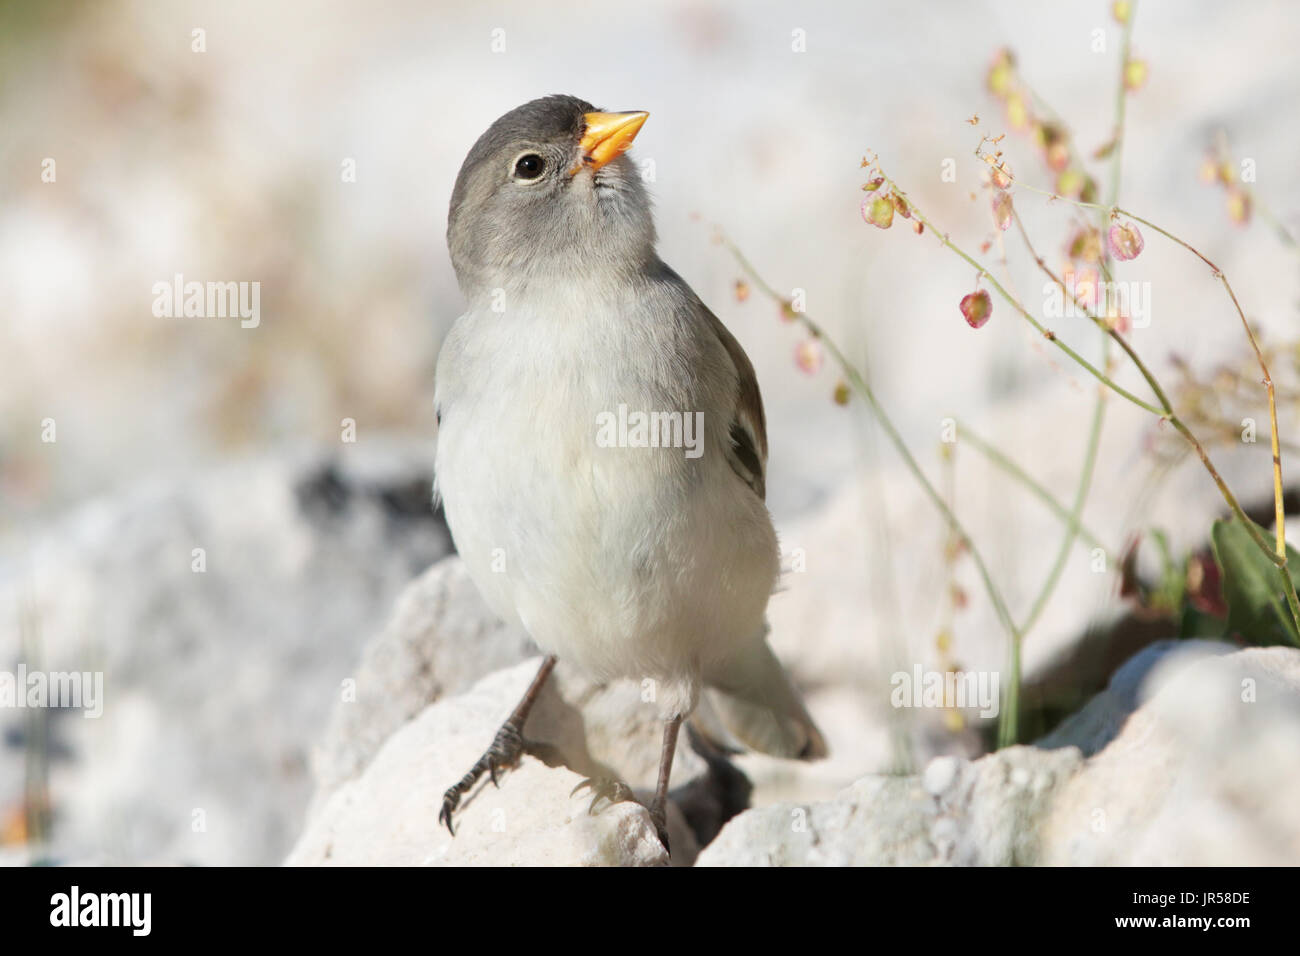 The white-winged snowfinch (Montifringilla nivalis) is a small passerine bird than live in mountain. It is a sparrow rather than a true finch. Stock Photo